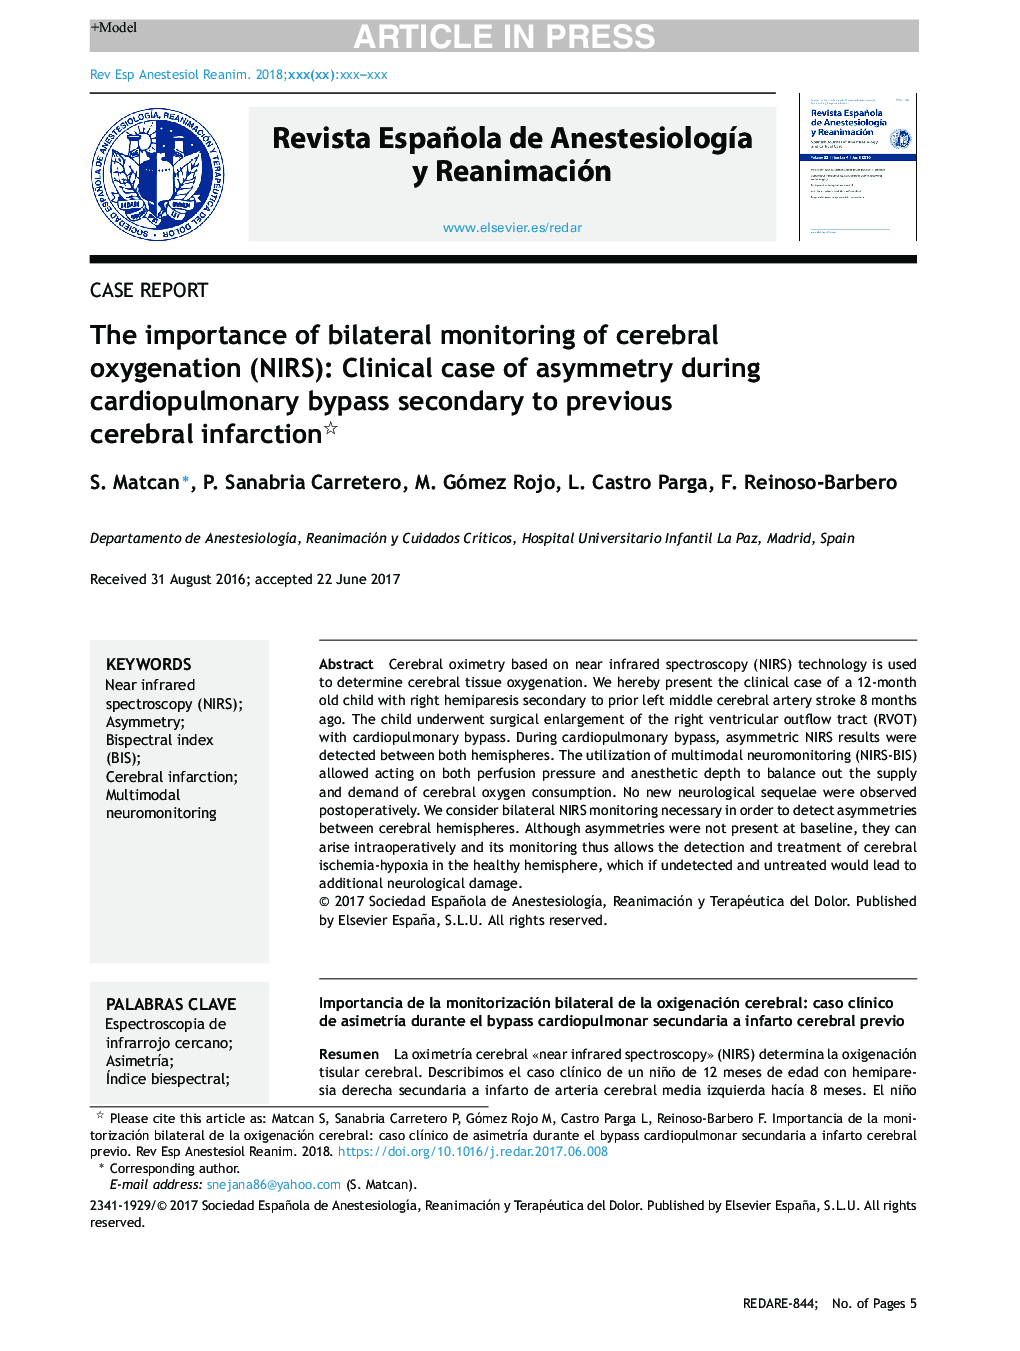 The importance of bilateral monitoring of cerebral oxygenation (NIRS): Clinical case of asymmetry during cardiopulmonary bypass secondary to previous cerebral infarction